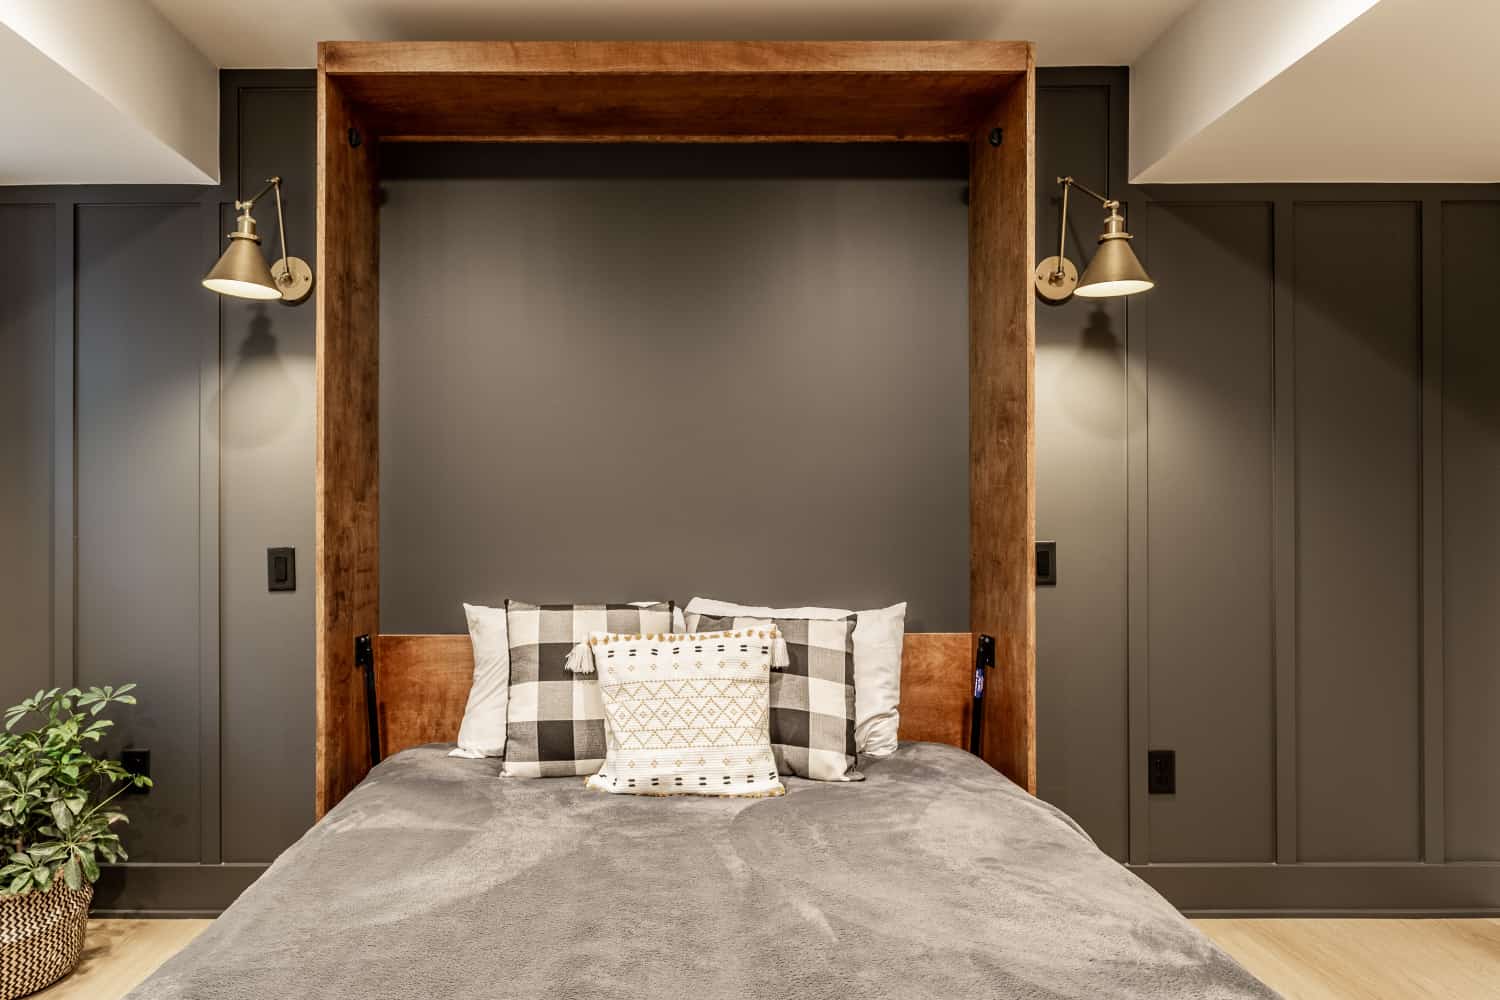 Nicholas Design Build | A bedroom with a bed and a wooden headboard underwent a remodel.